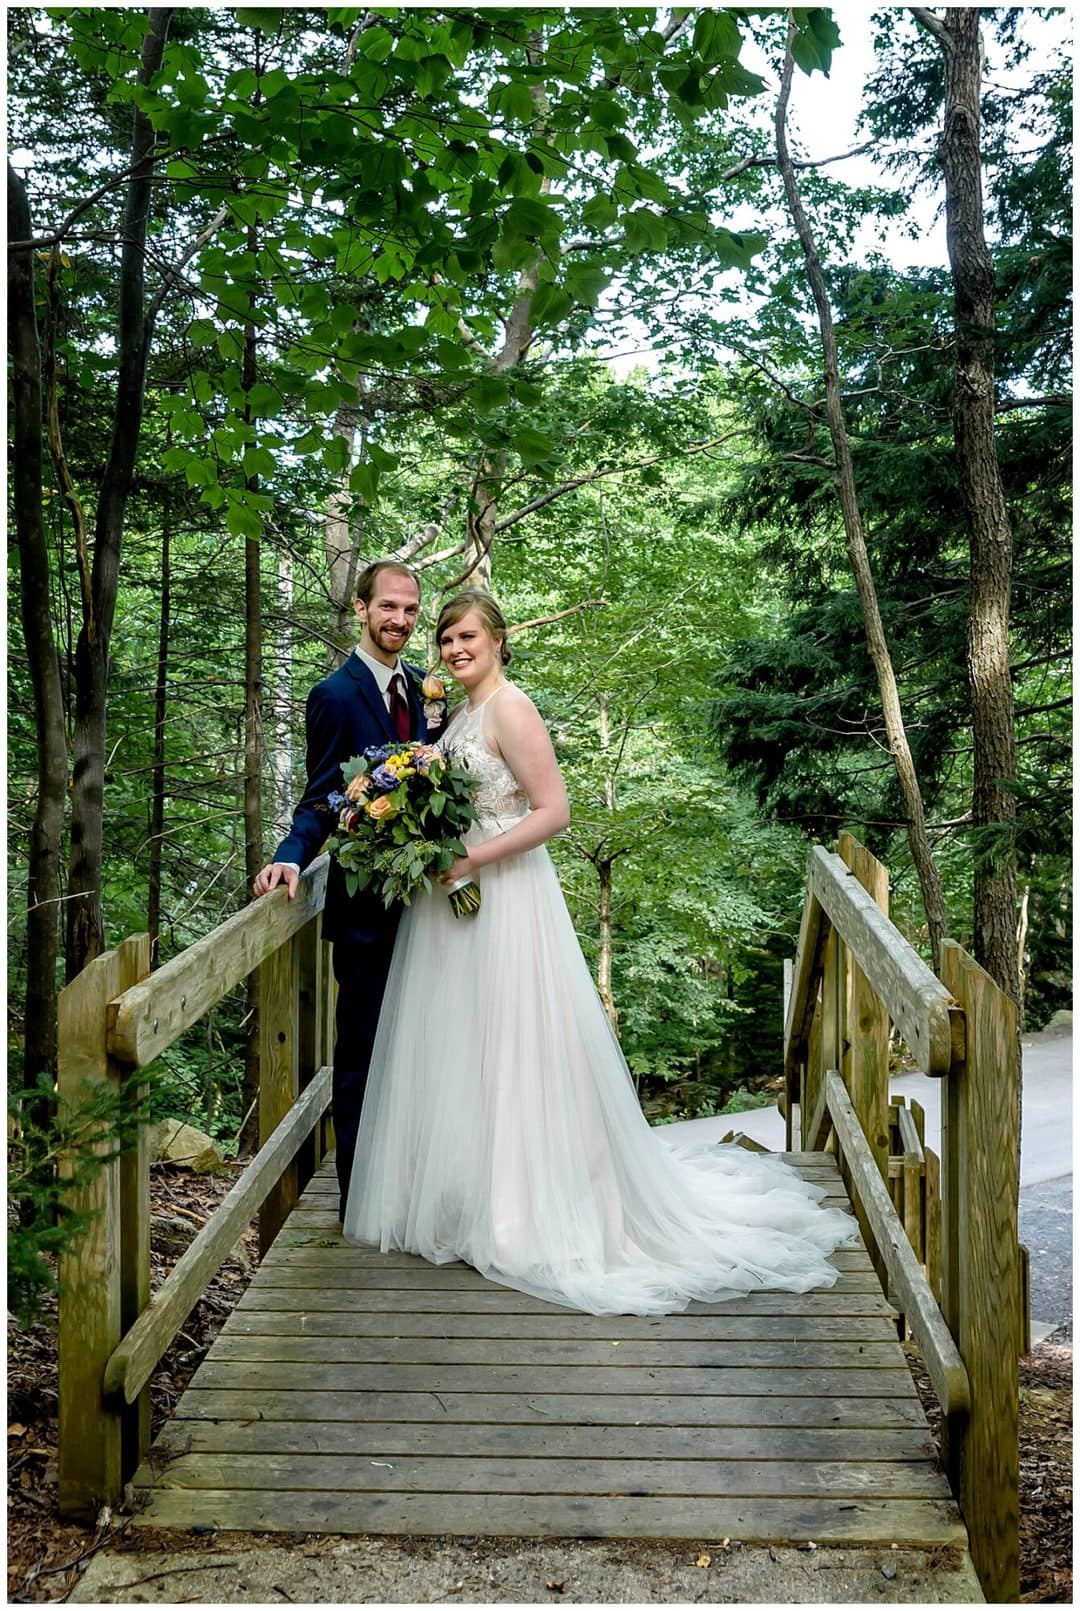 The bride and groom pose for their wedding photos in the forest surrounding Sir Sandford Fleming Park in Halifax, NS.